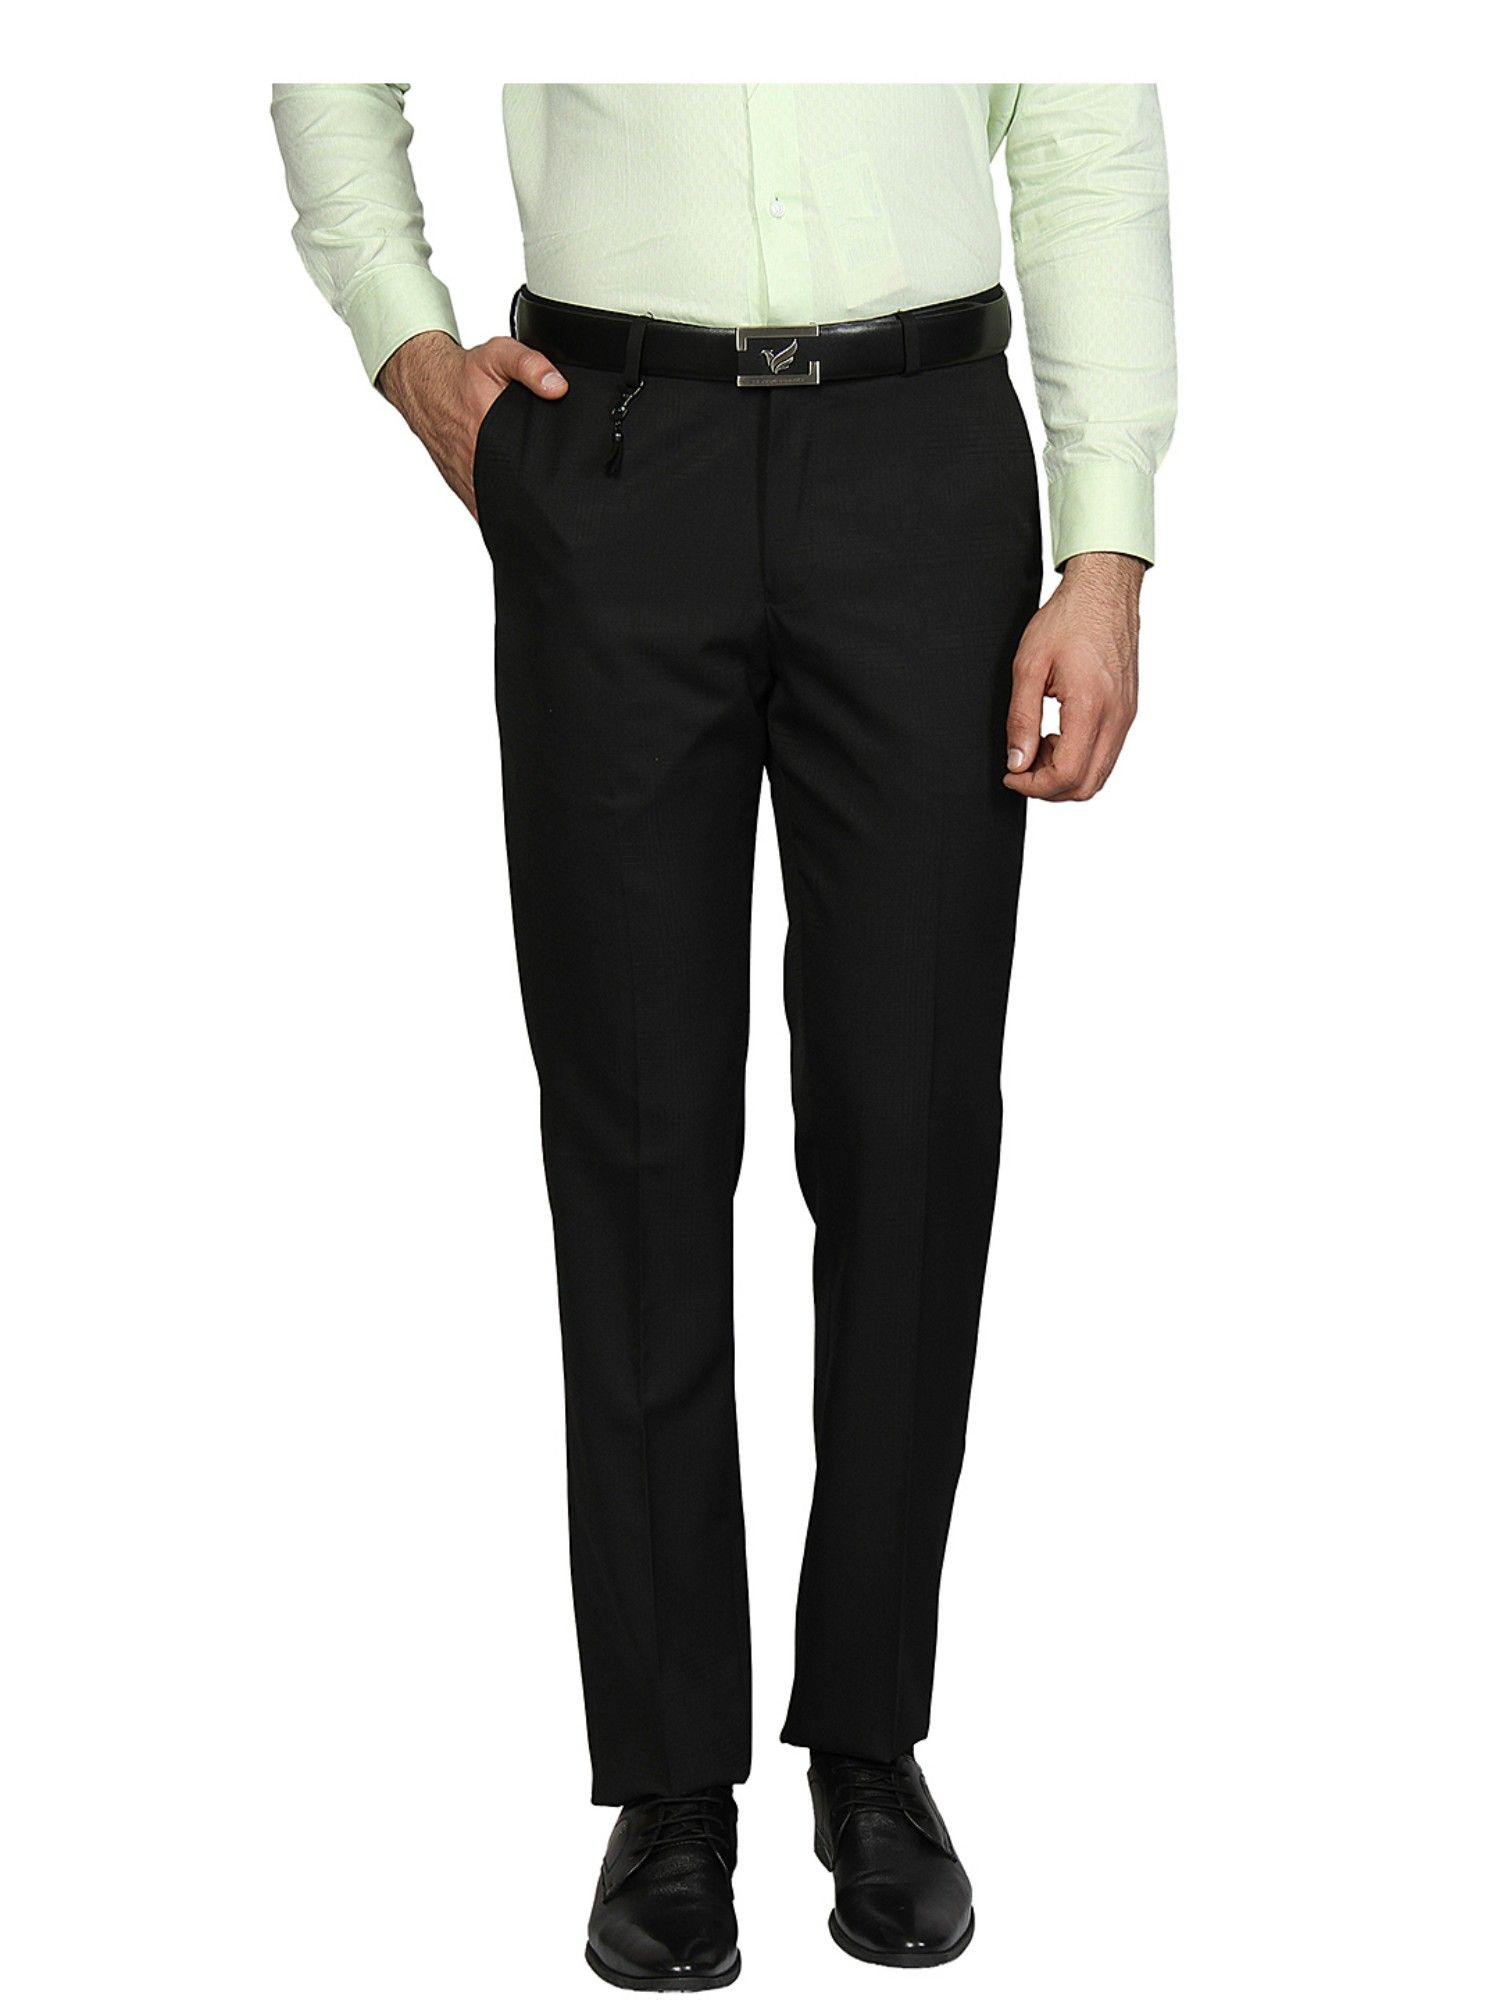 Buy blackberrys Men's Formal B-91 Skinny Fit Stretchable Trousers Black at  Amazon.in